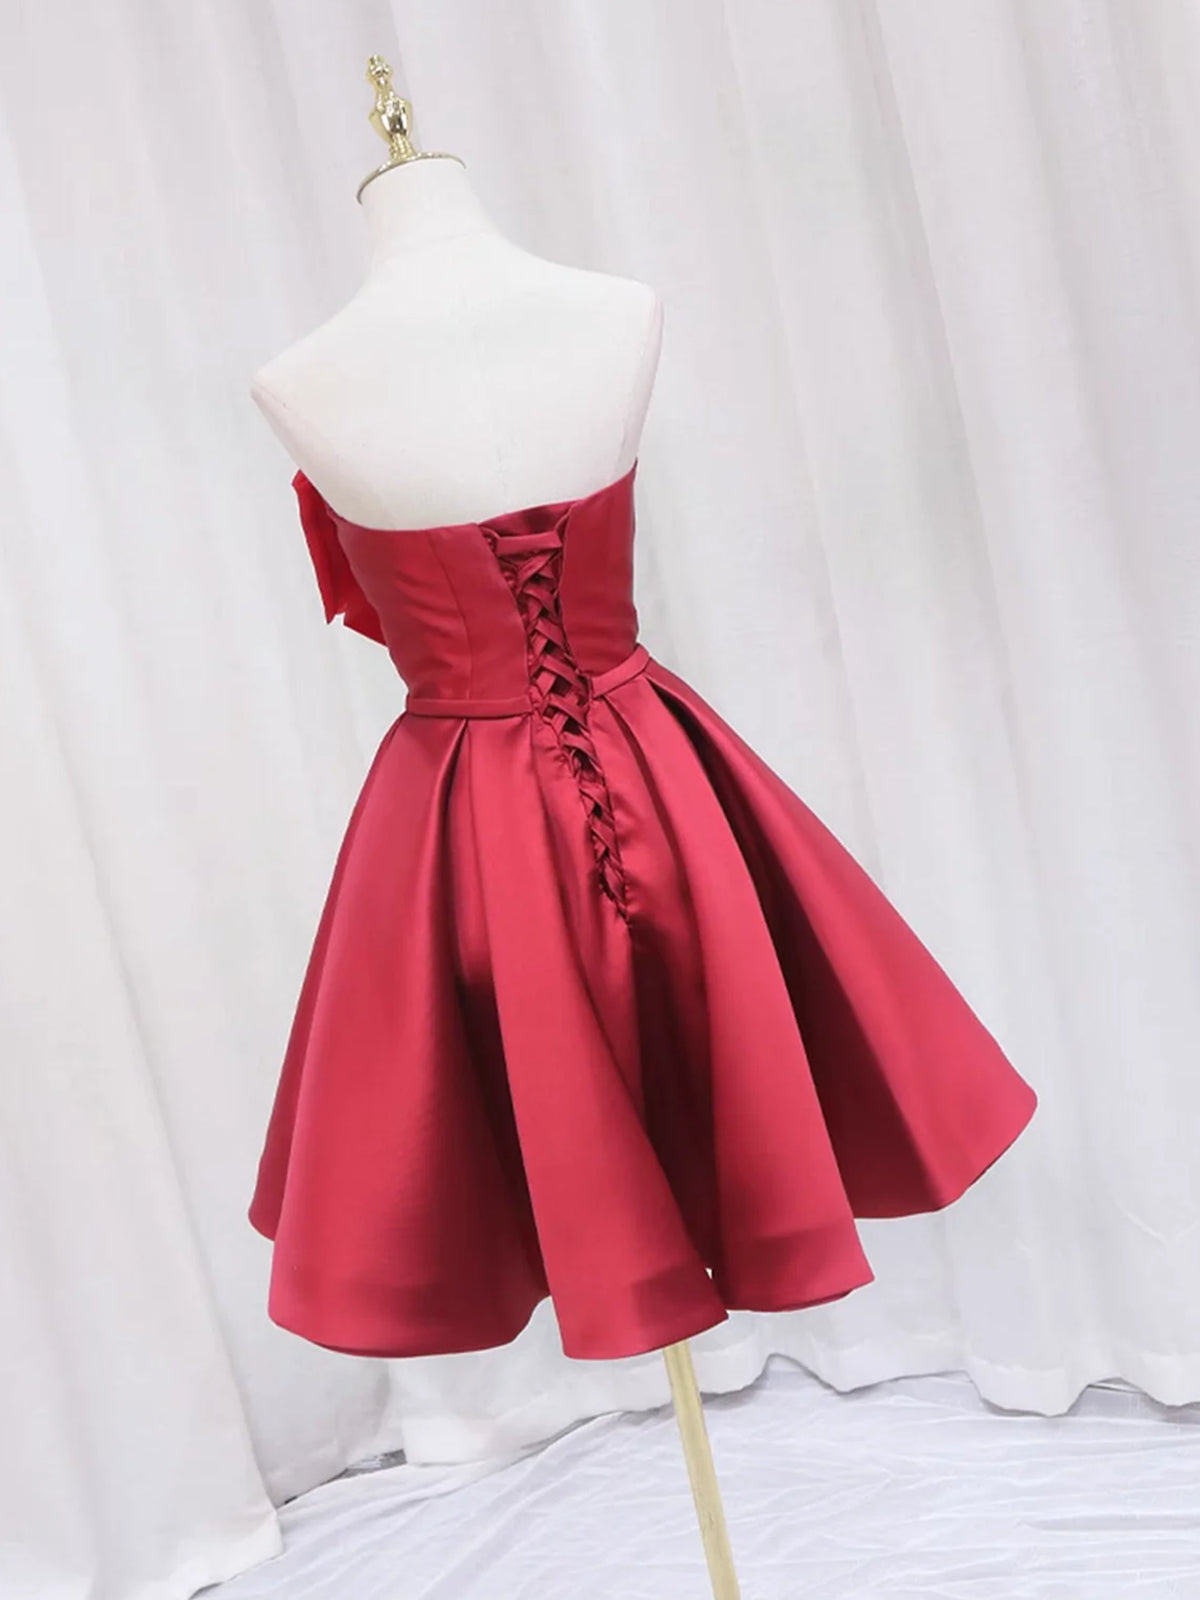 Short Red Prom Dresses, Short Red Formal Homecoming Dresses